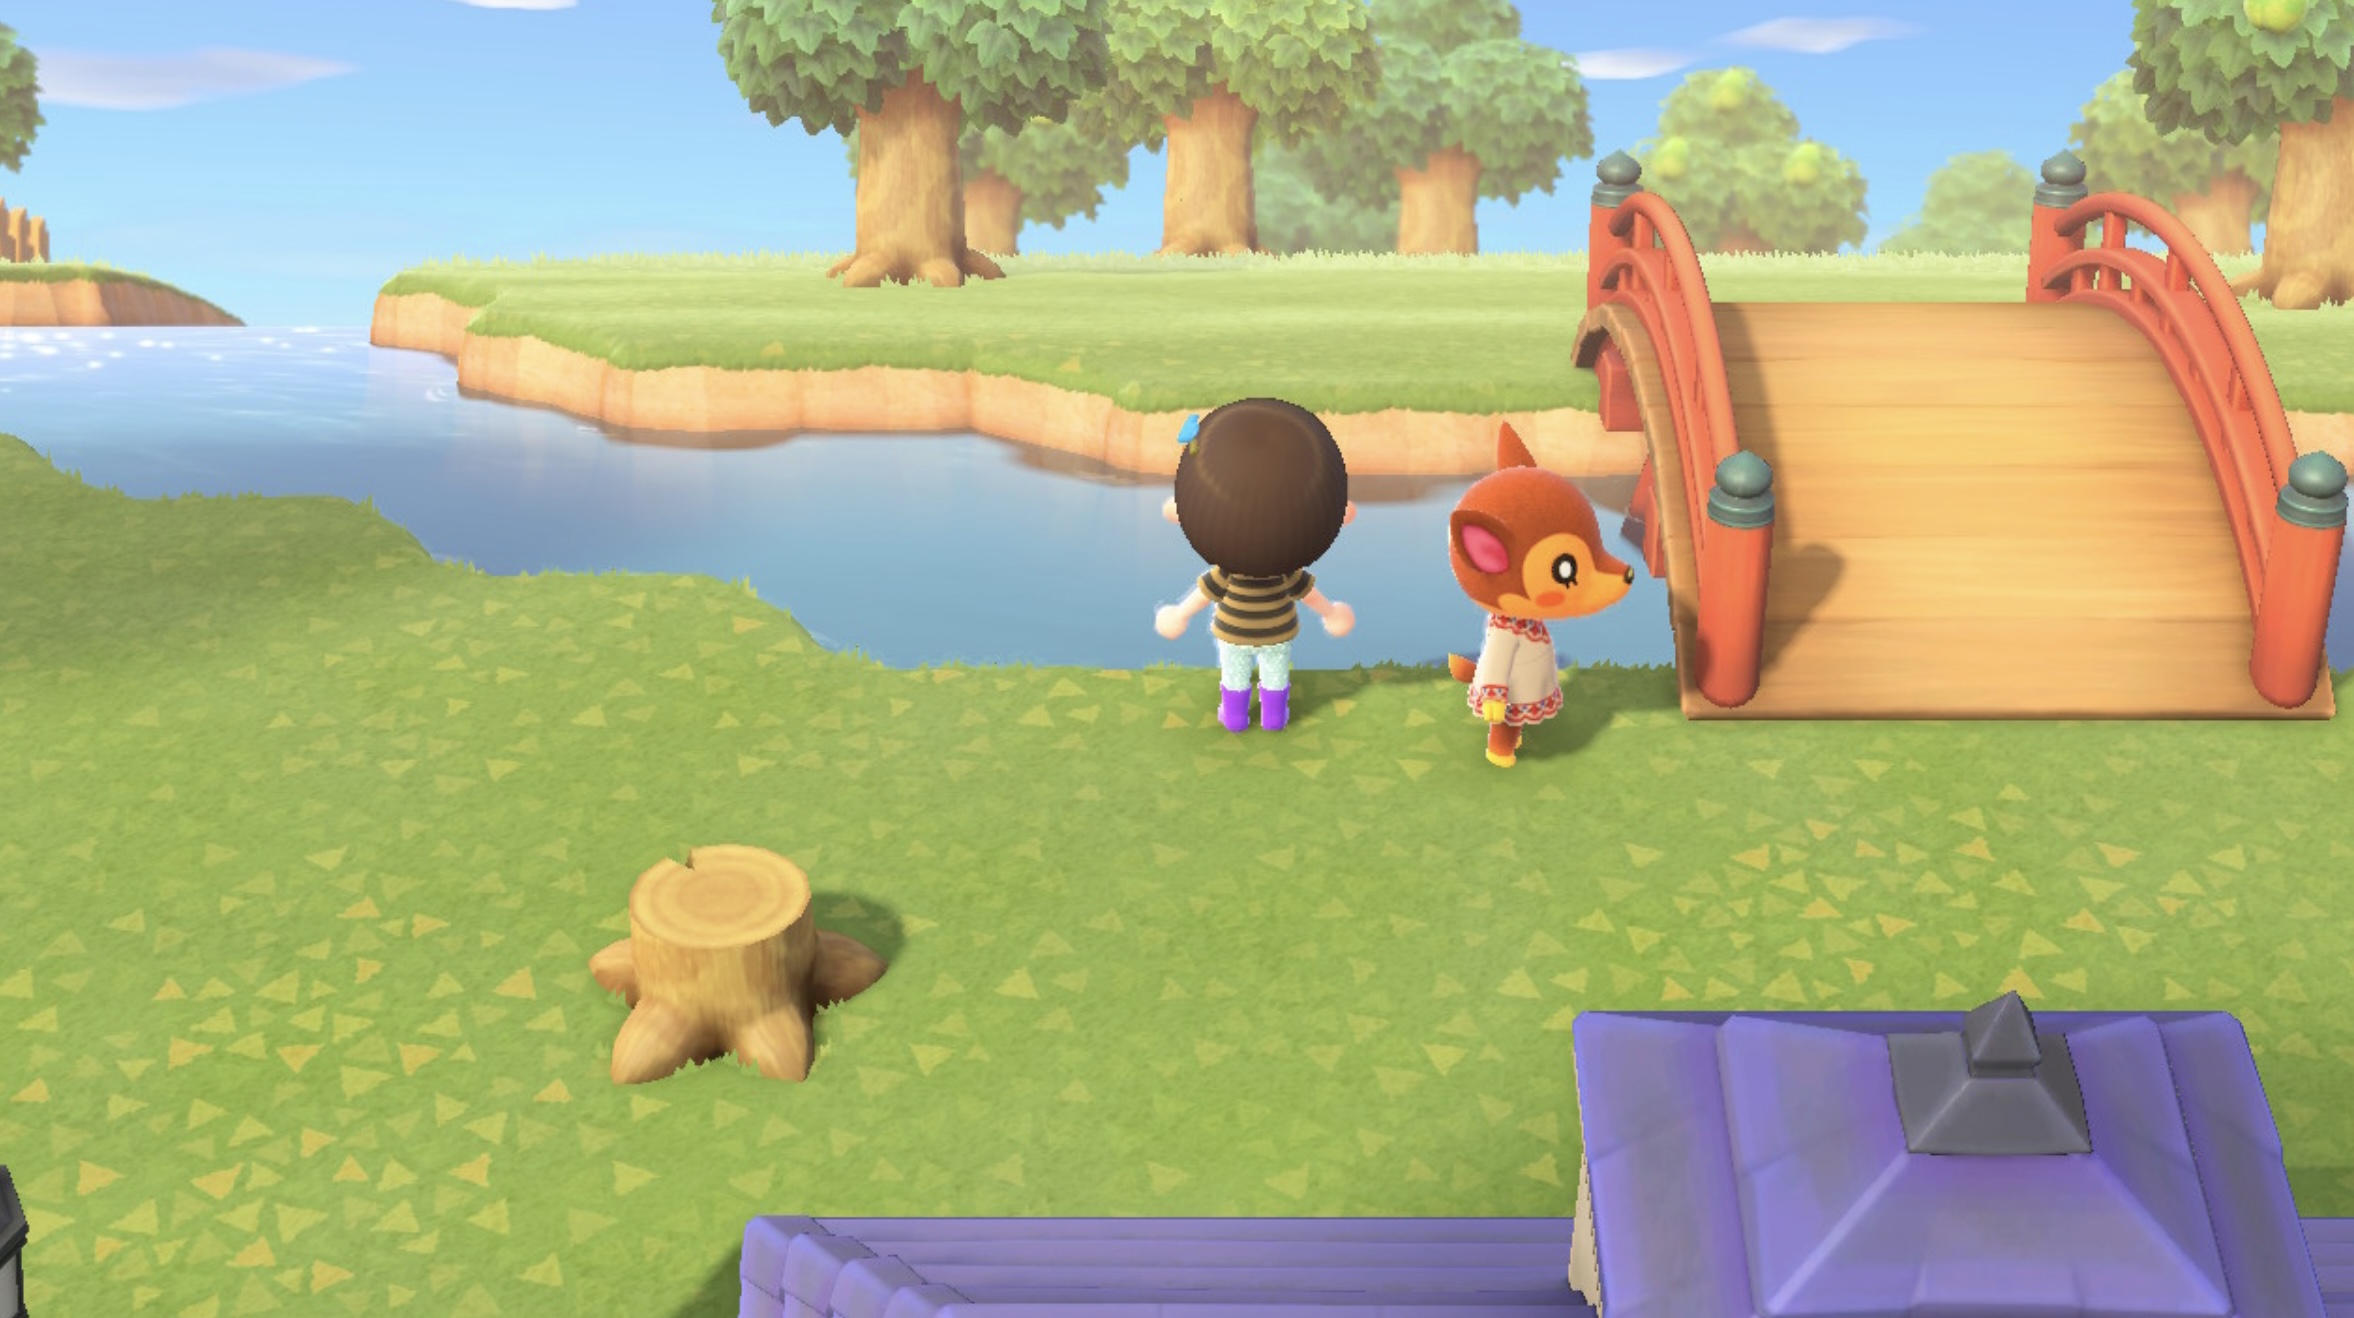 How To Build A Bridge In Animal Crossing